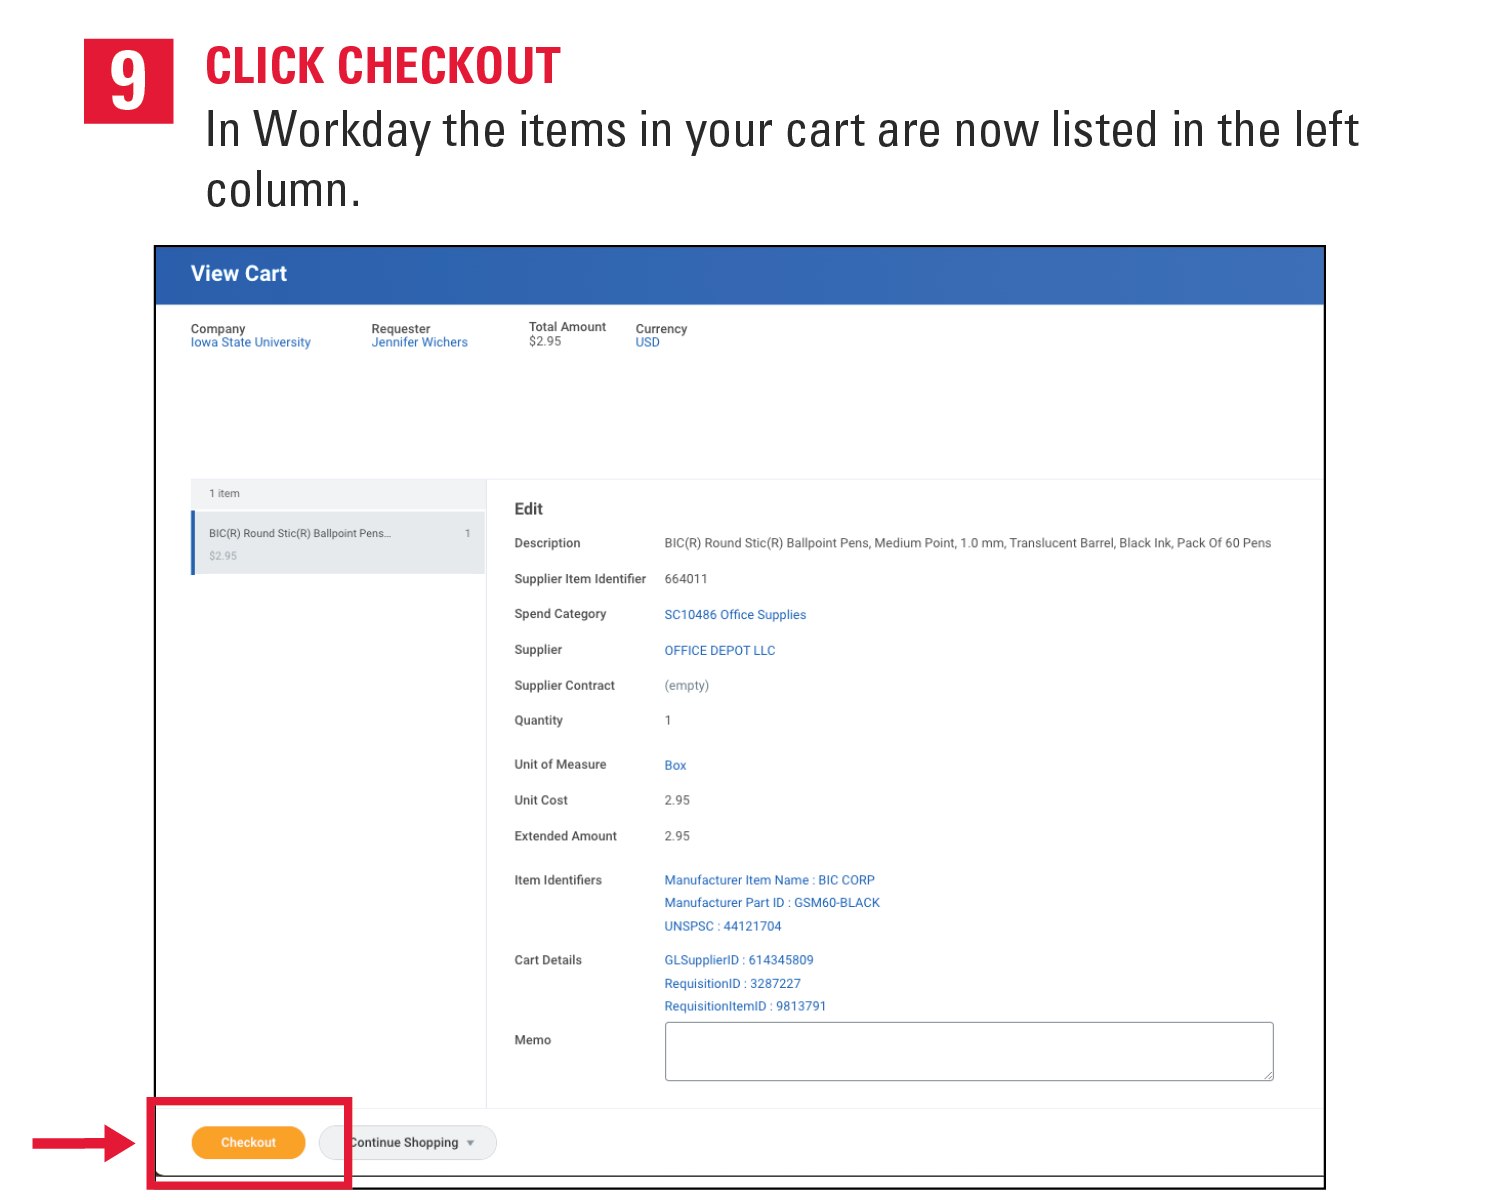 9. Click Checkout. In Workday the items in your cart are now listed in the left column.